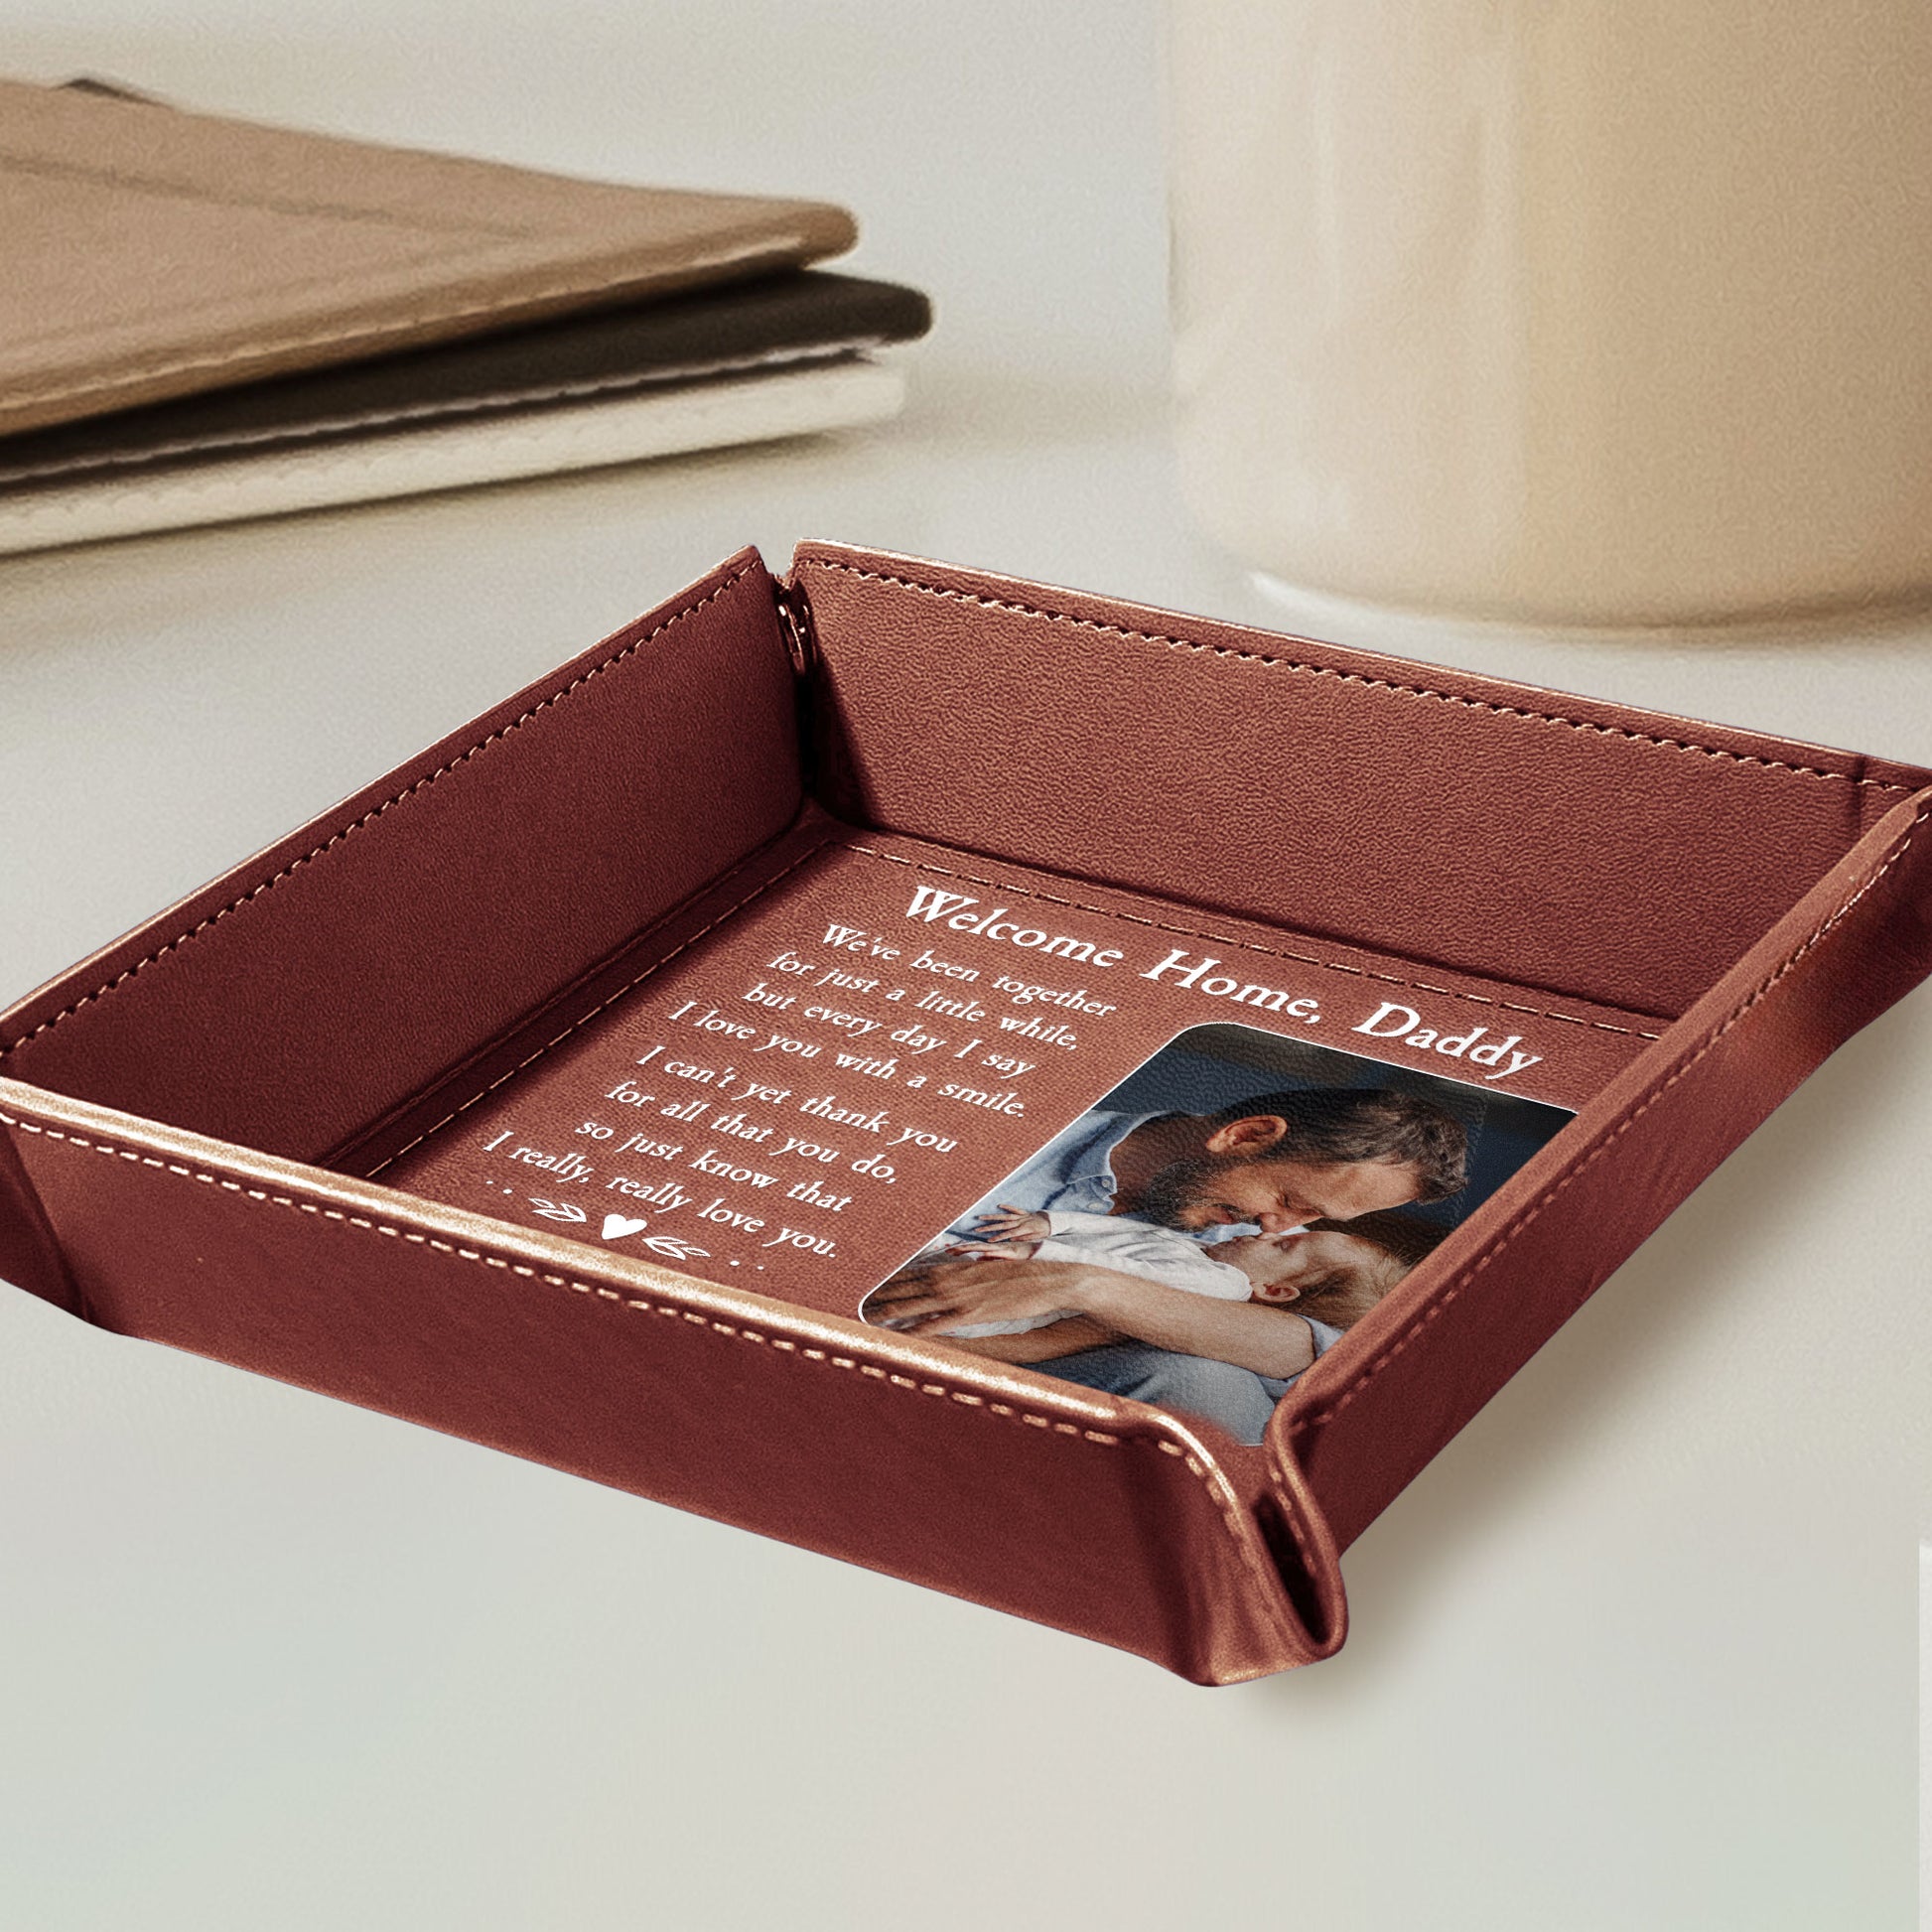 We've Been Together For Just A Little While New Dad - Personalized Leather Valet Tray